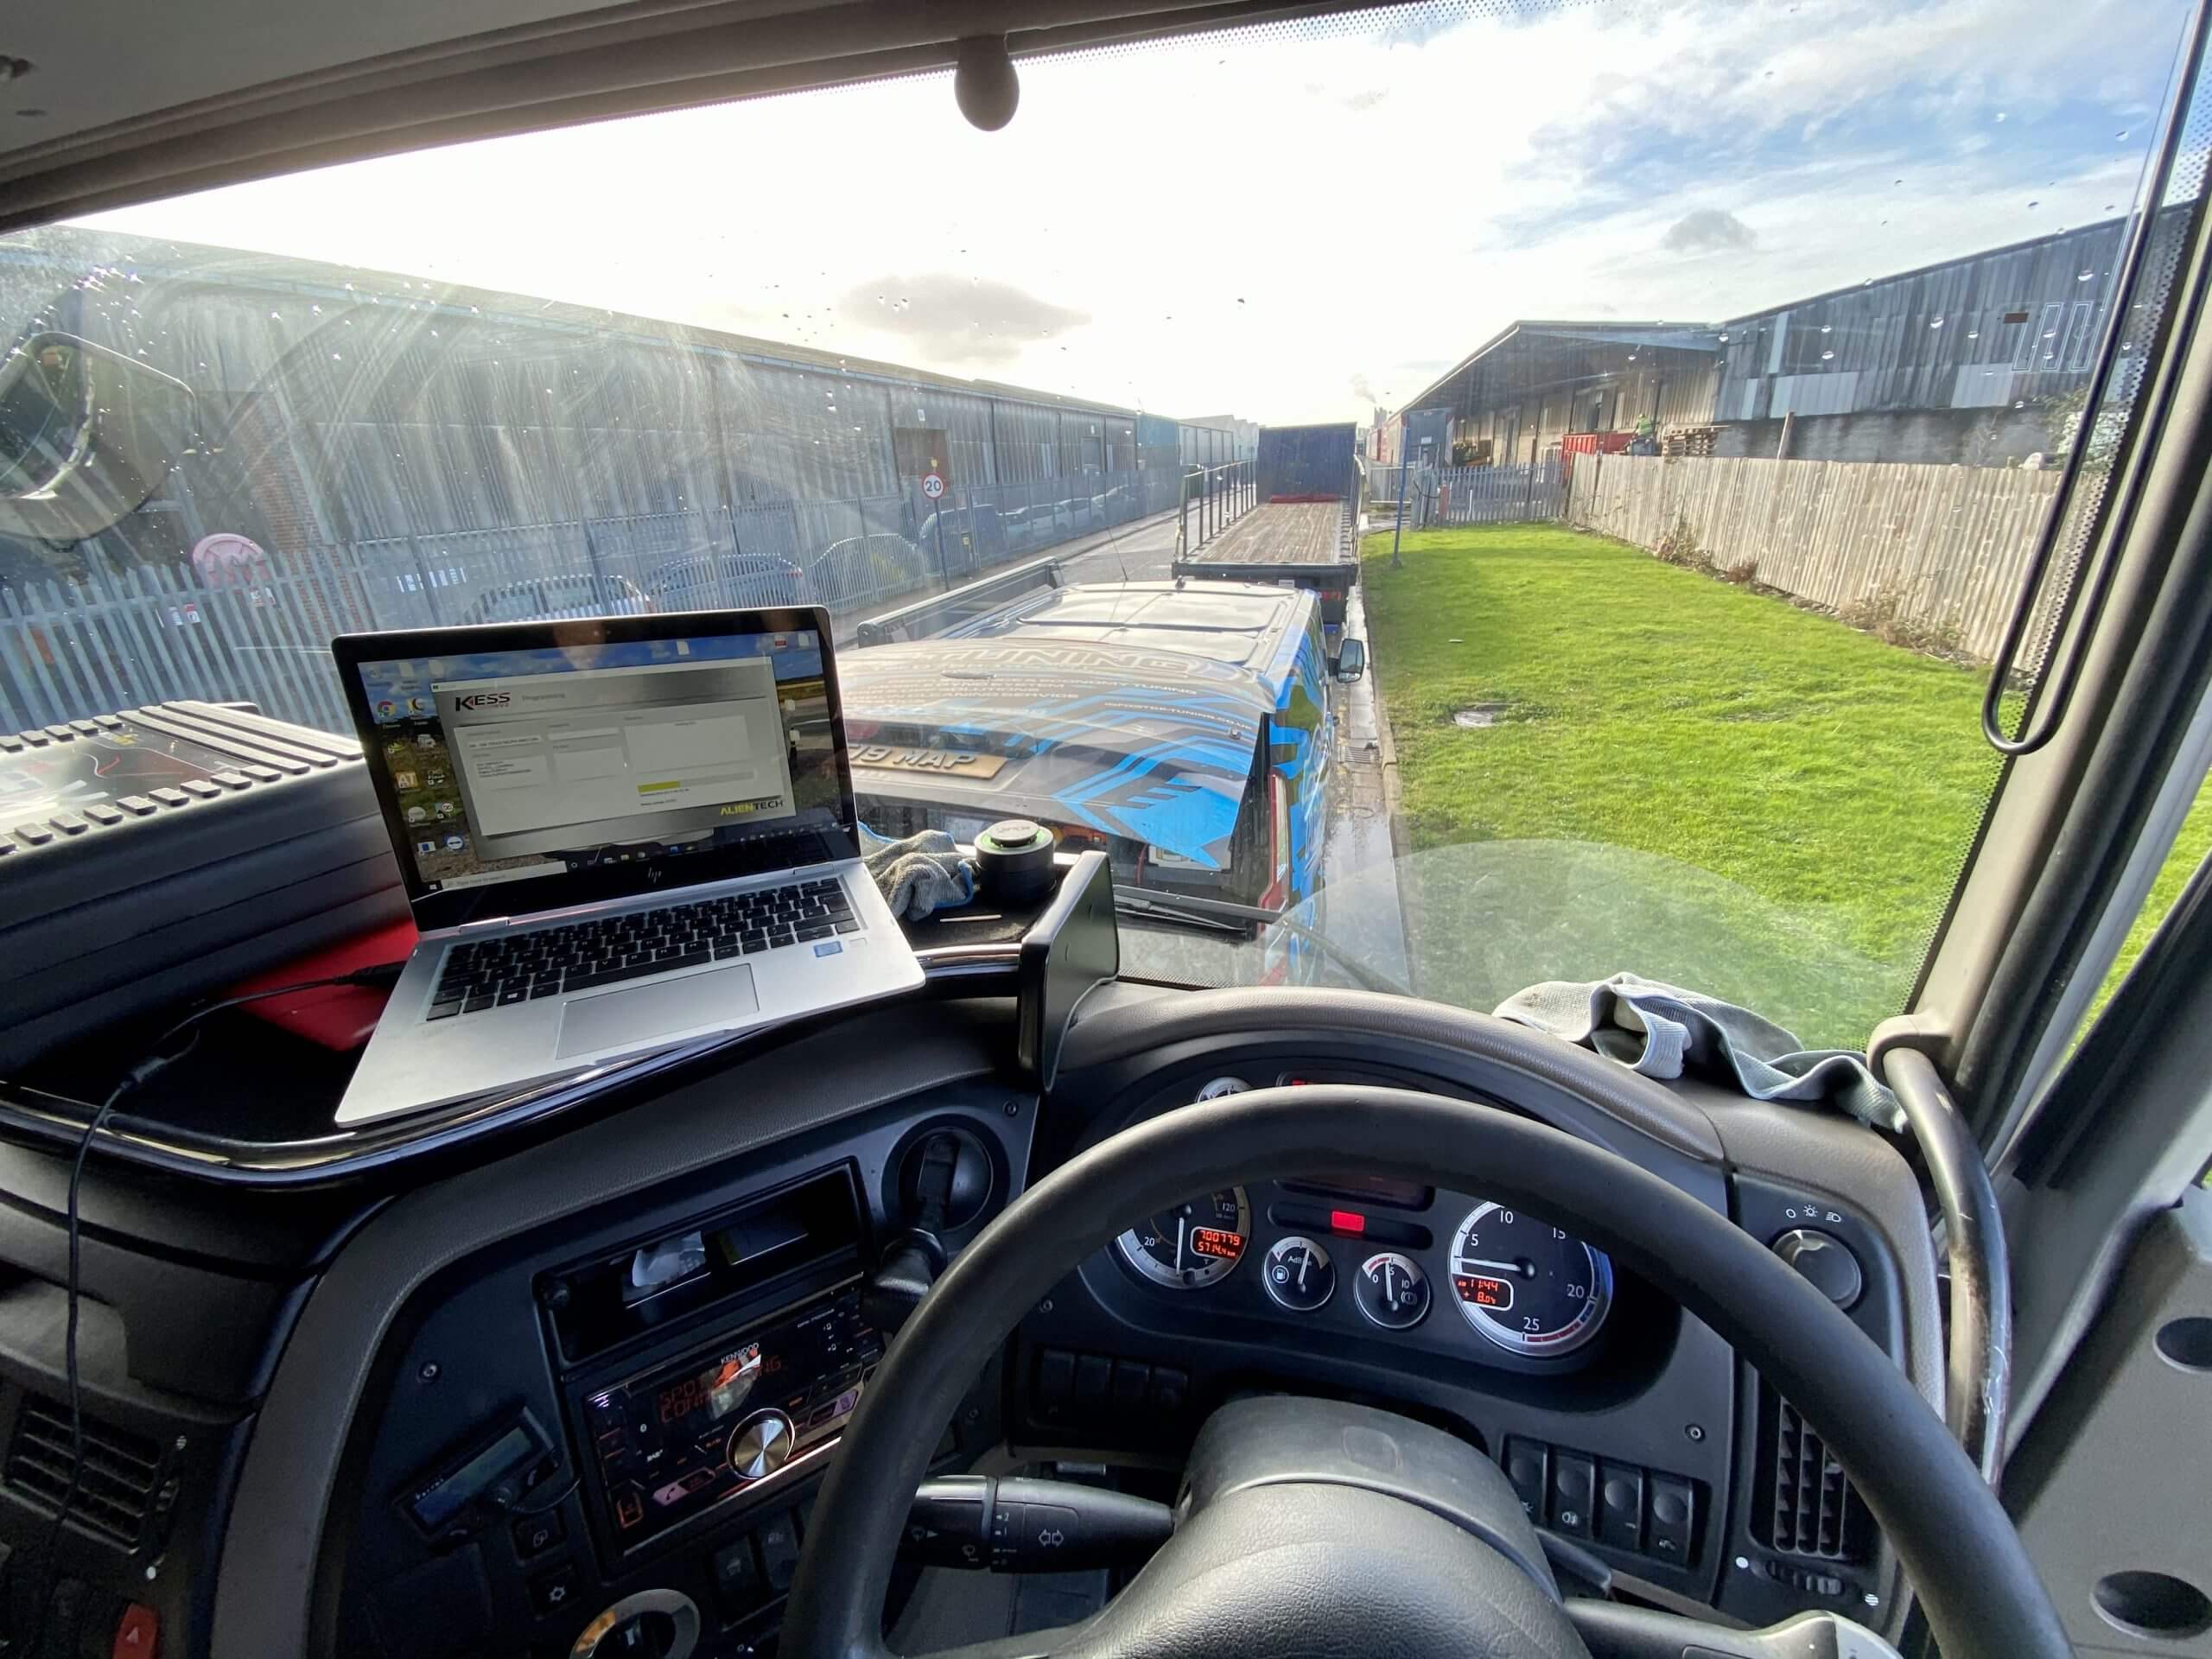 View of top-tuning at work from inside lorry